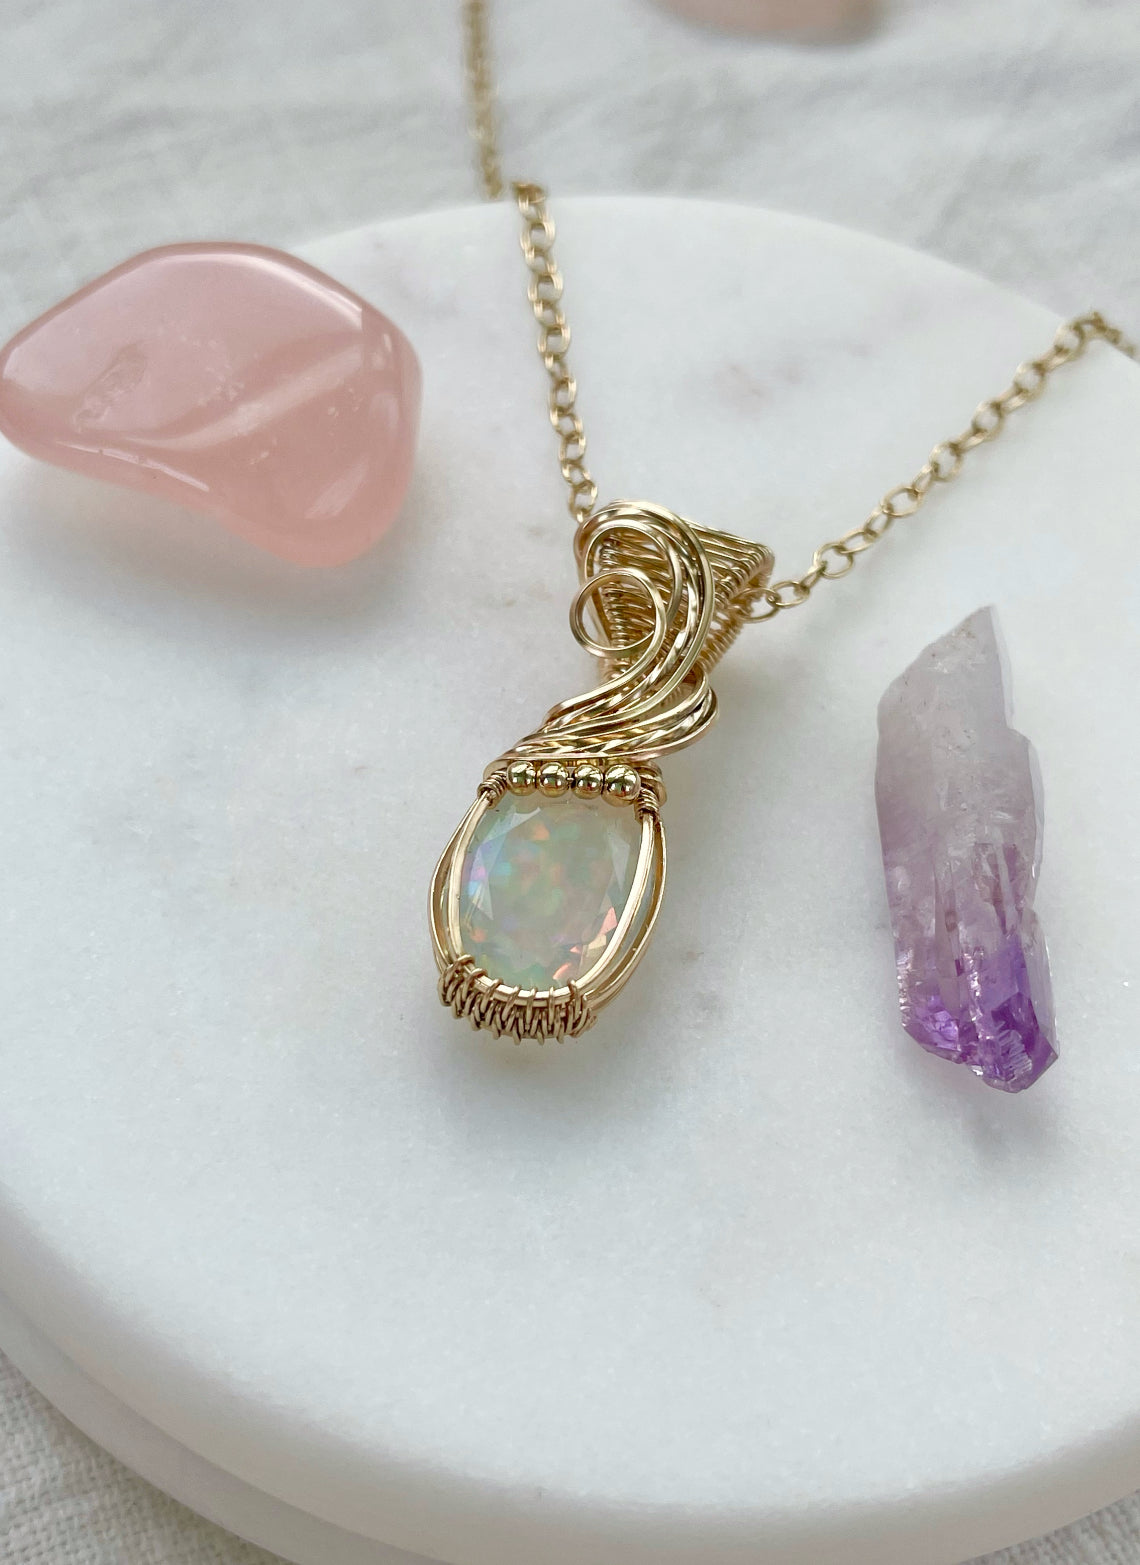 4.1 ct Faceted Opal Necklace in 14k Gold Filled